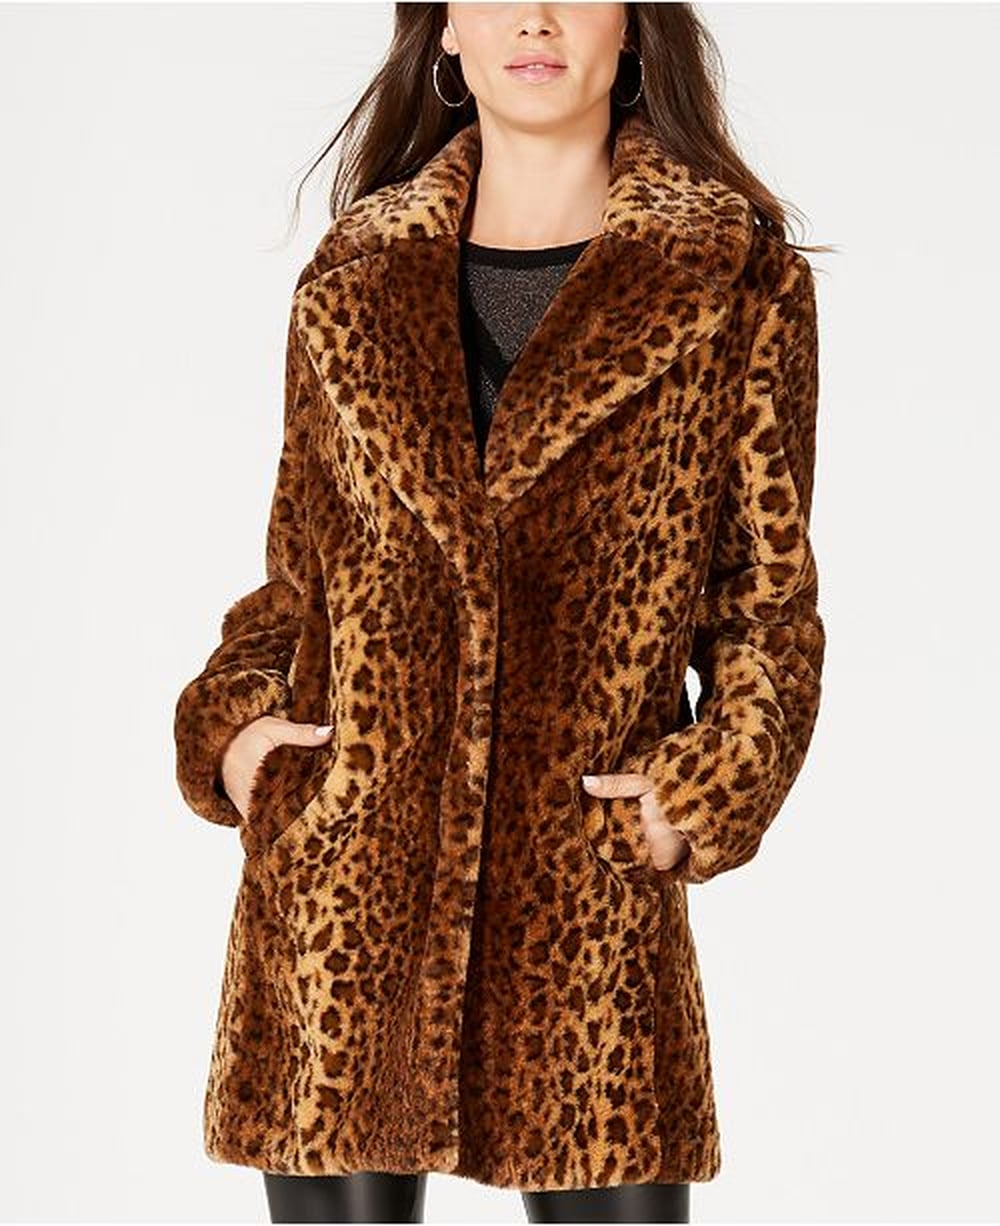 The Best Coats For Women at Macy's | POPSUGAR Fashion